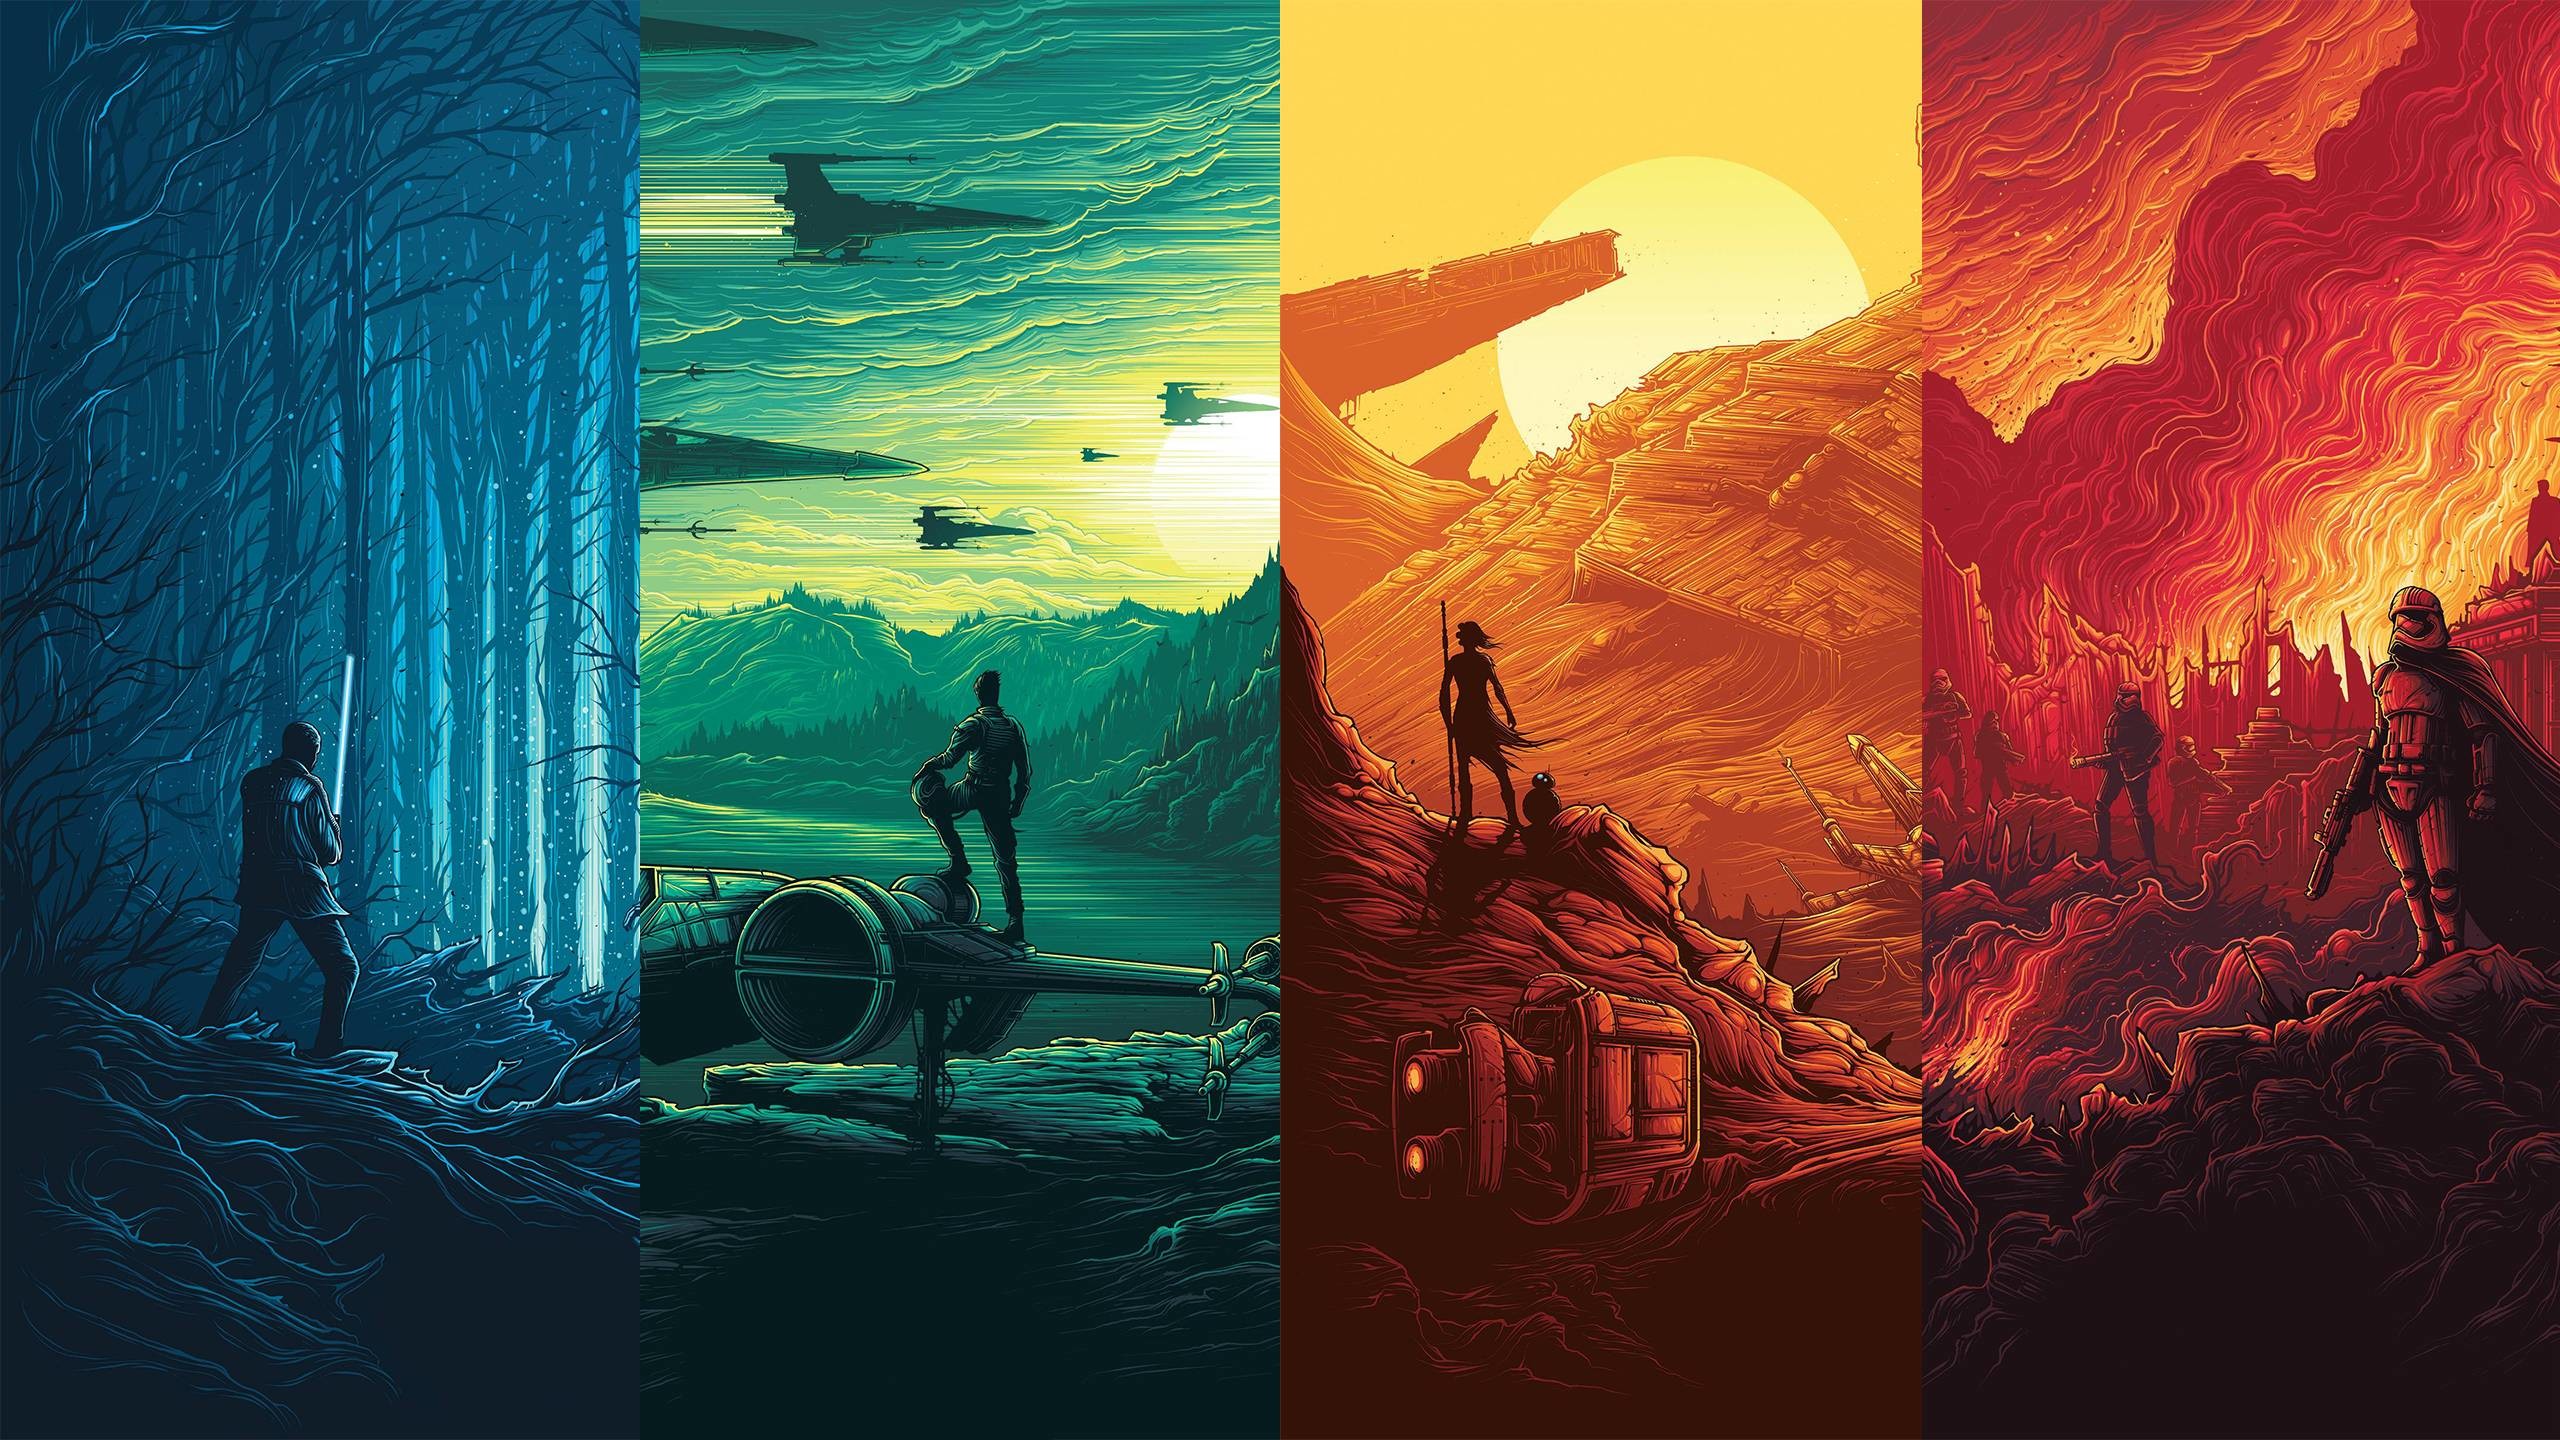 2560x1440 Tiny Star Wars Wallpaper collection.